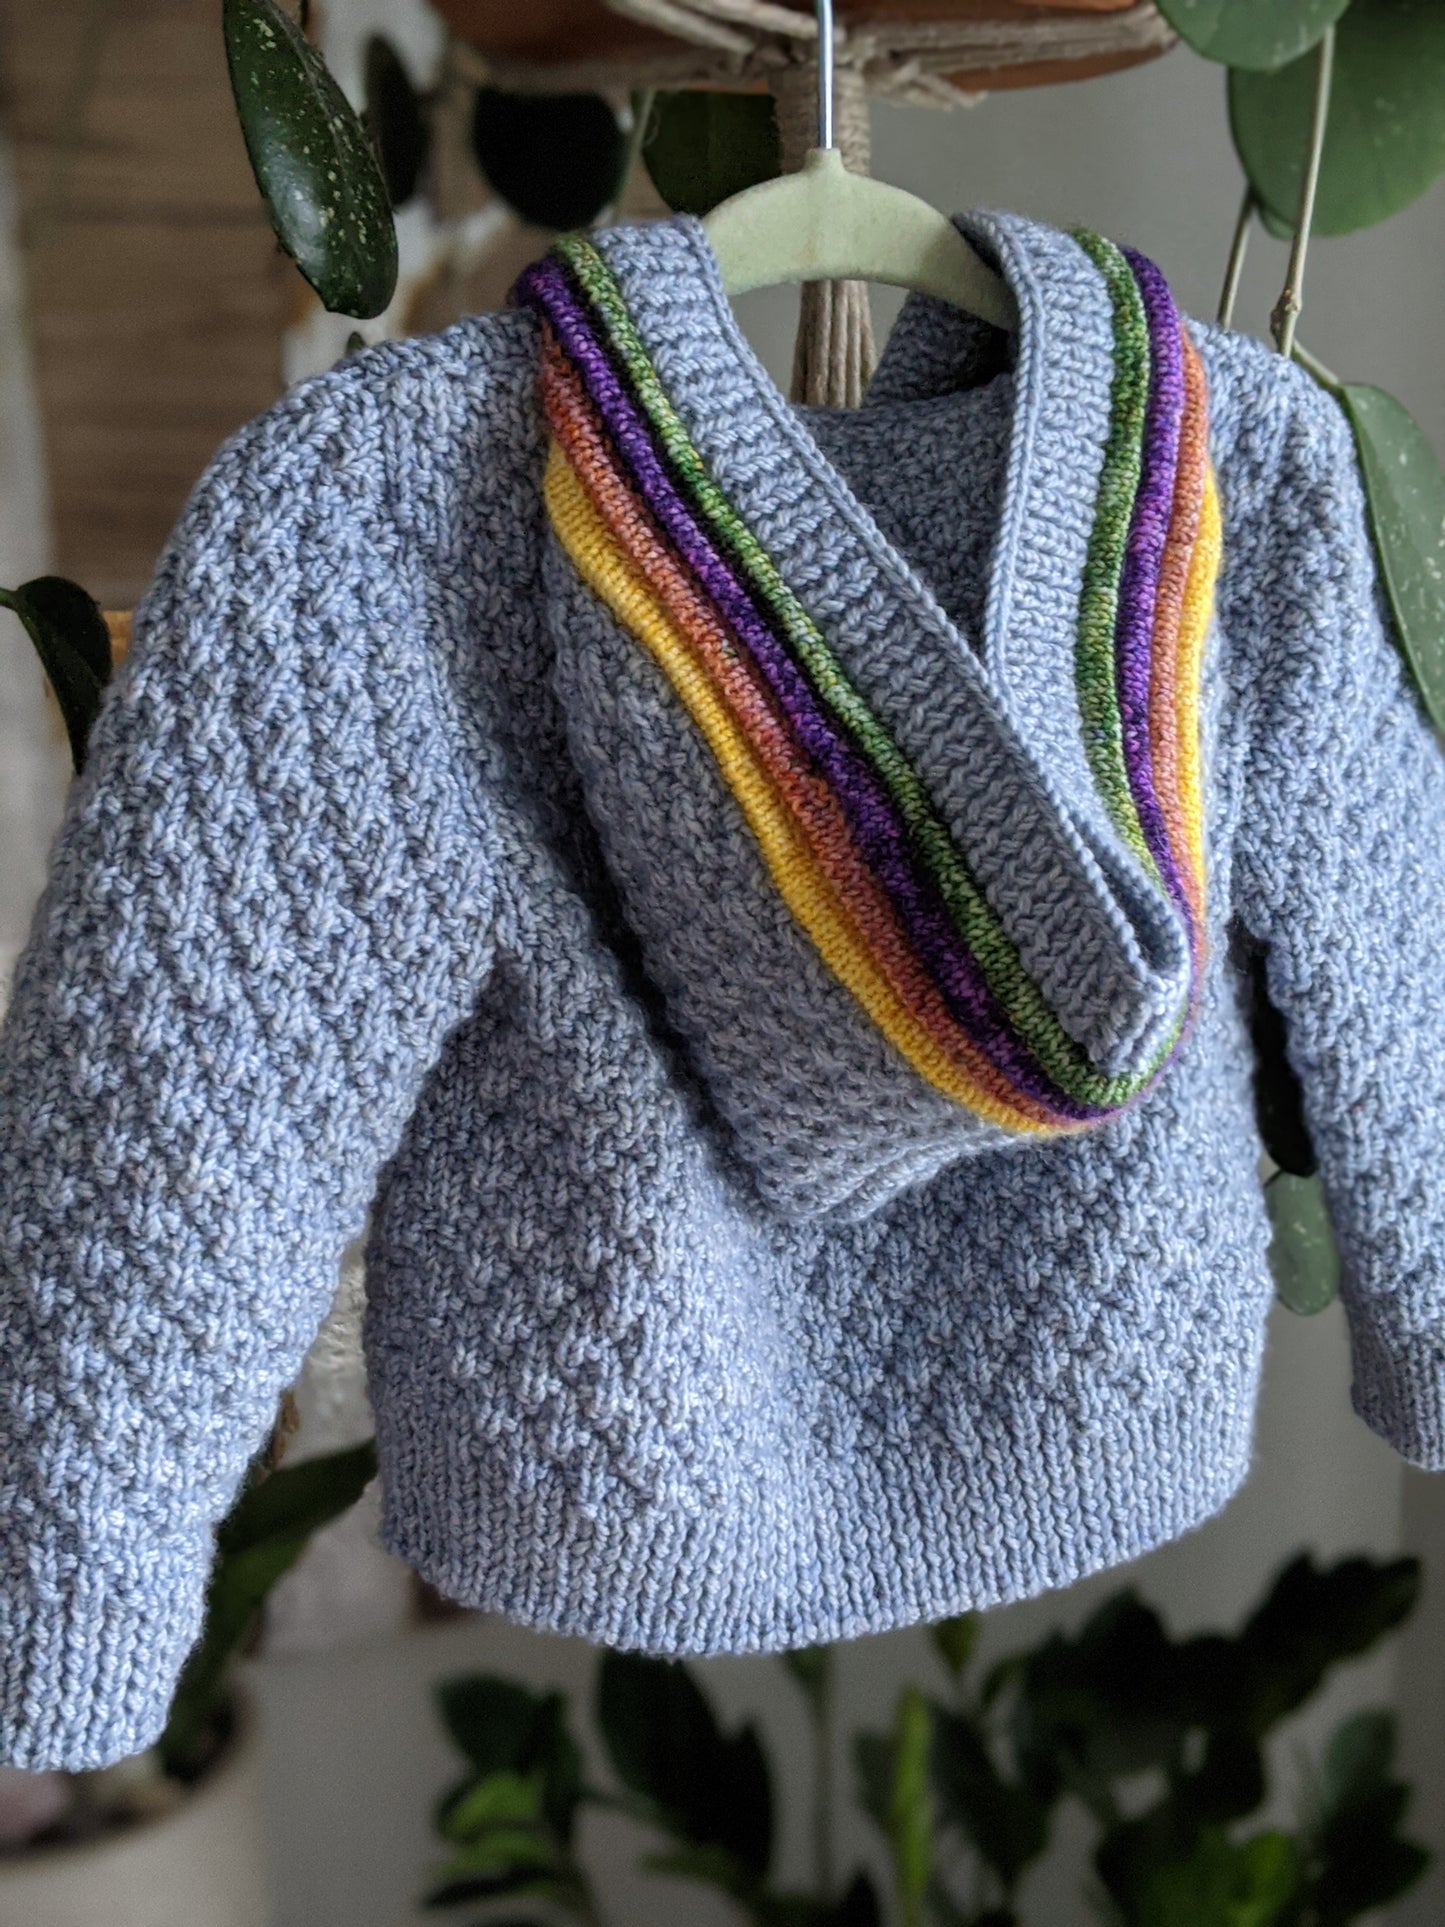 Seen close up and from behind, a moss stitch kid's sweater hangs from the bottom of a hanging plant. It's made with blue yarn and orange, yellow, purple, and green plackets around the button band and up the hood.